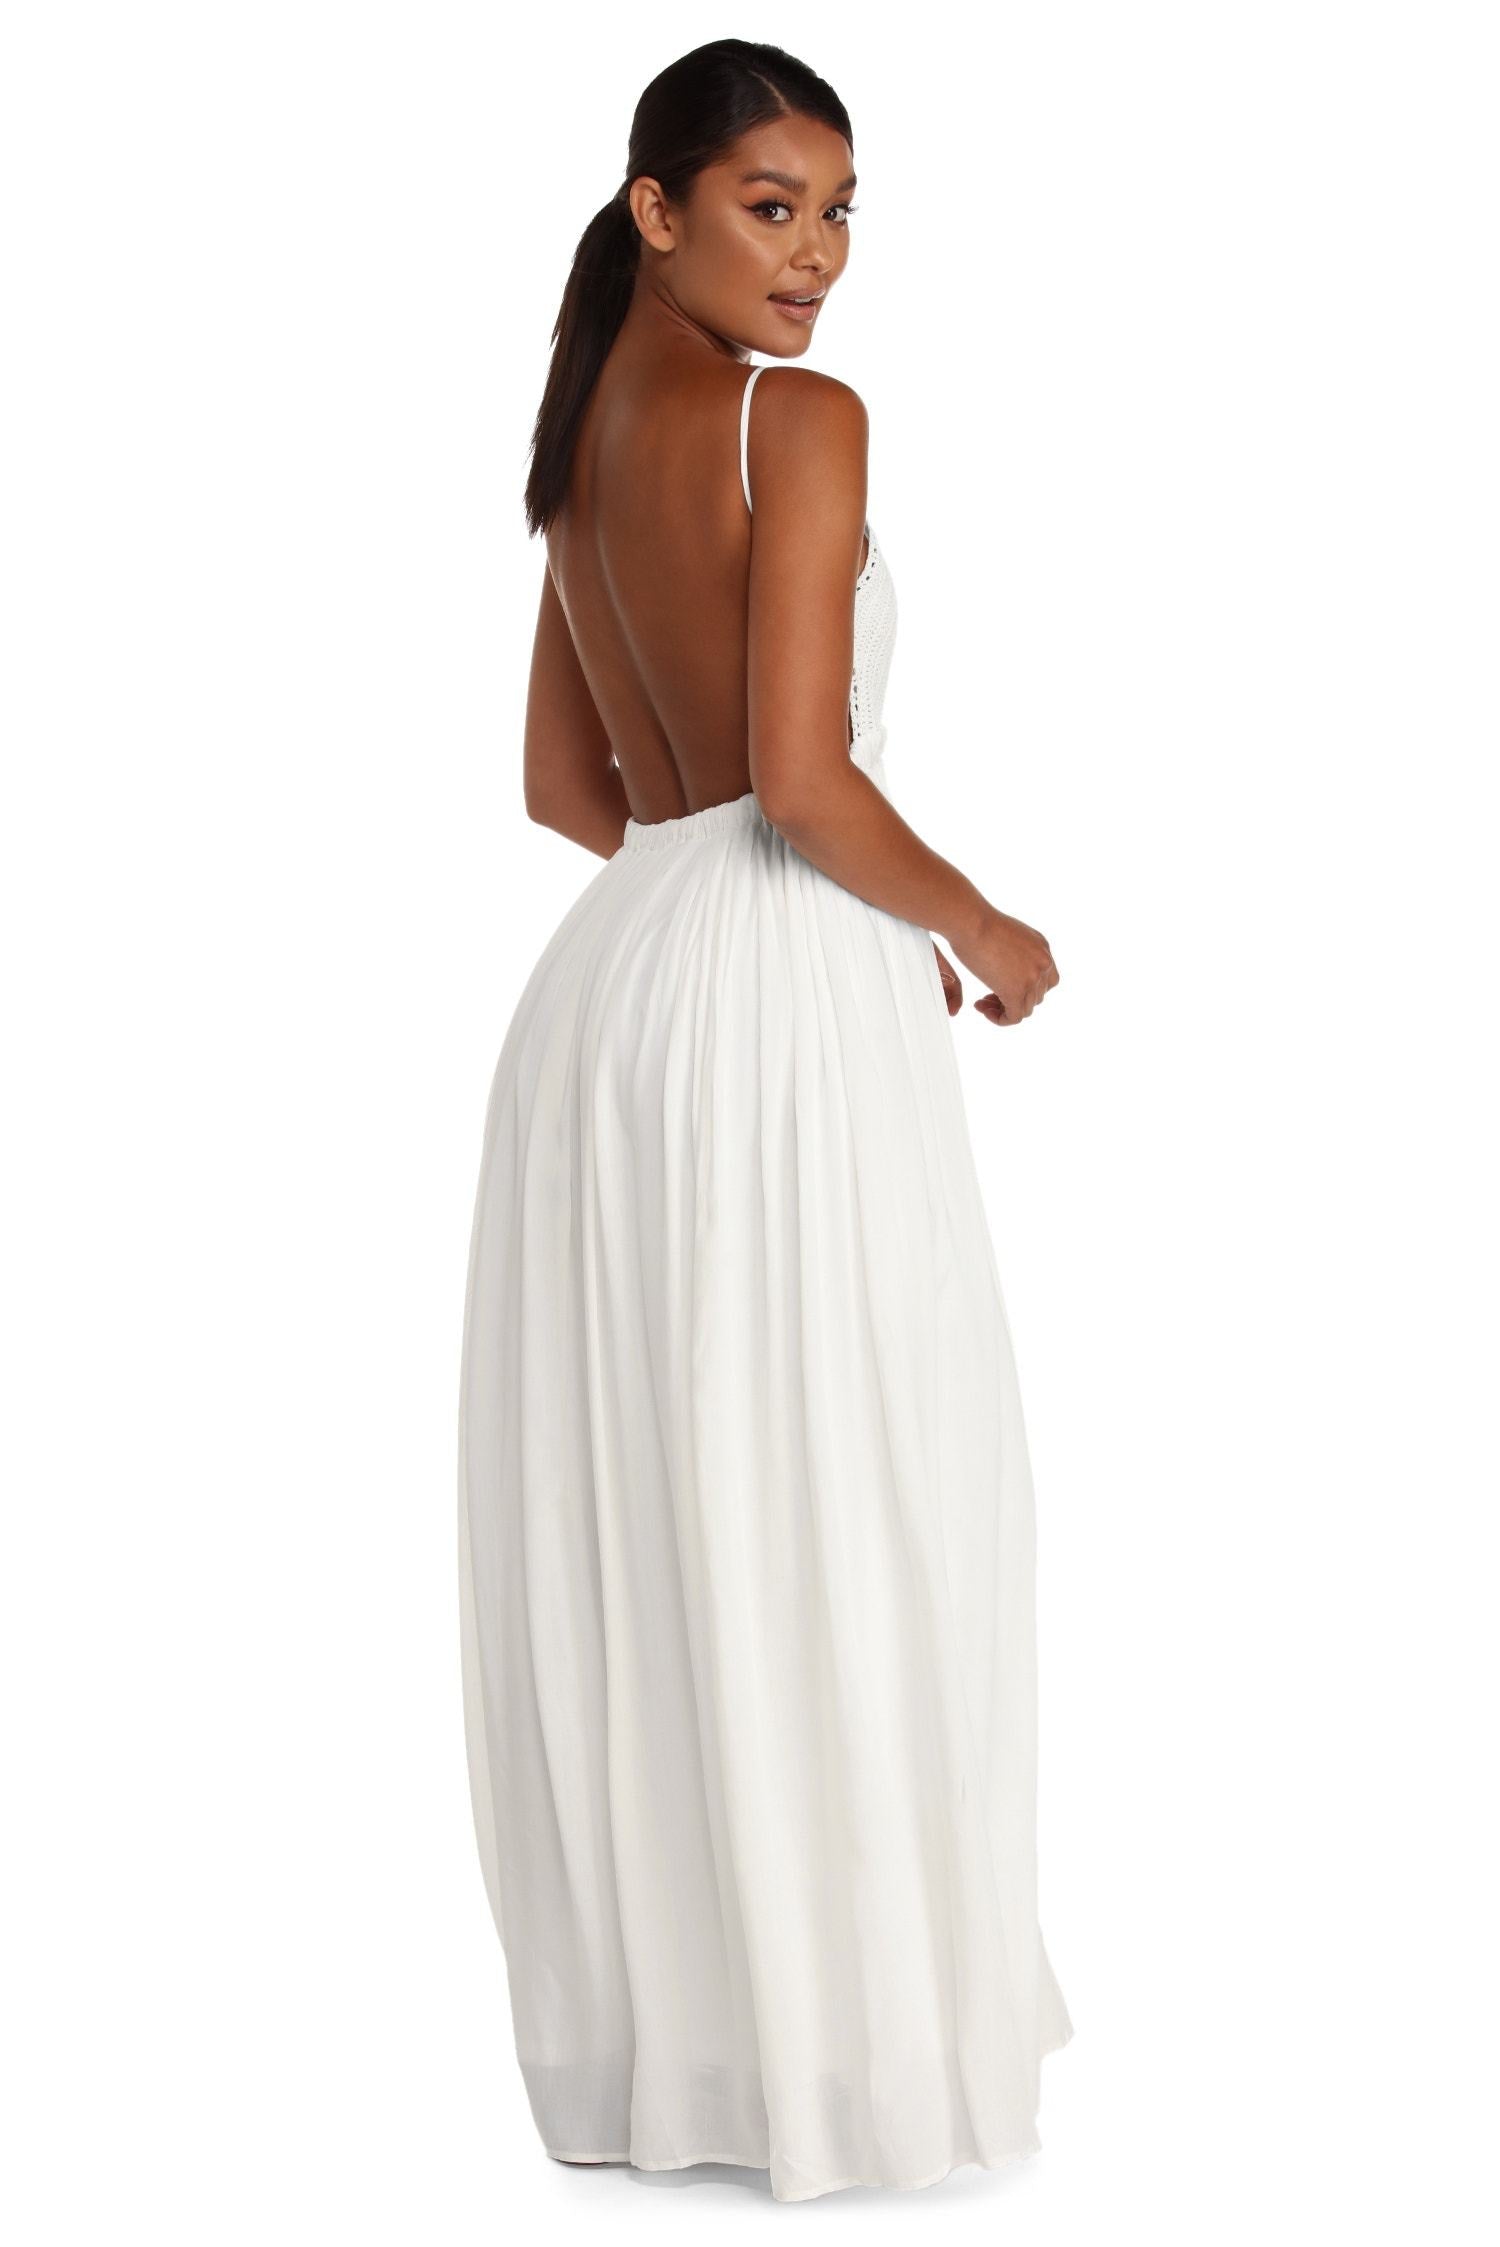 Ethereal Beauty Maxi Dress - Lady Occasions